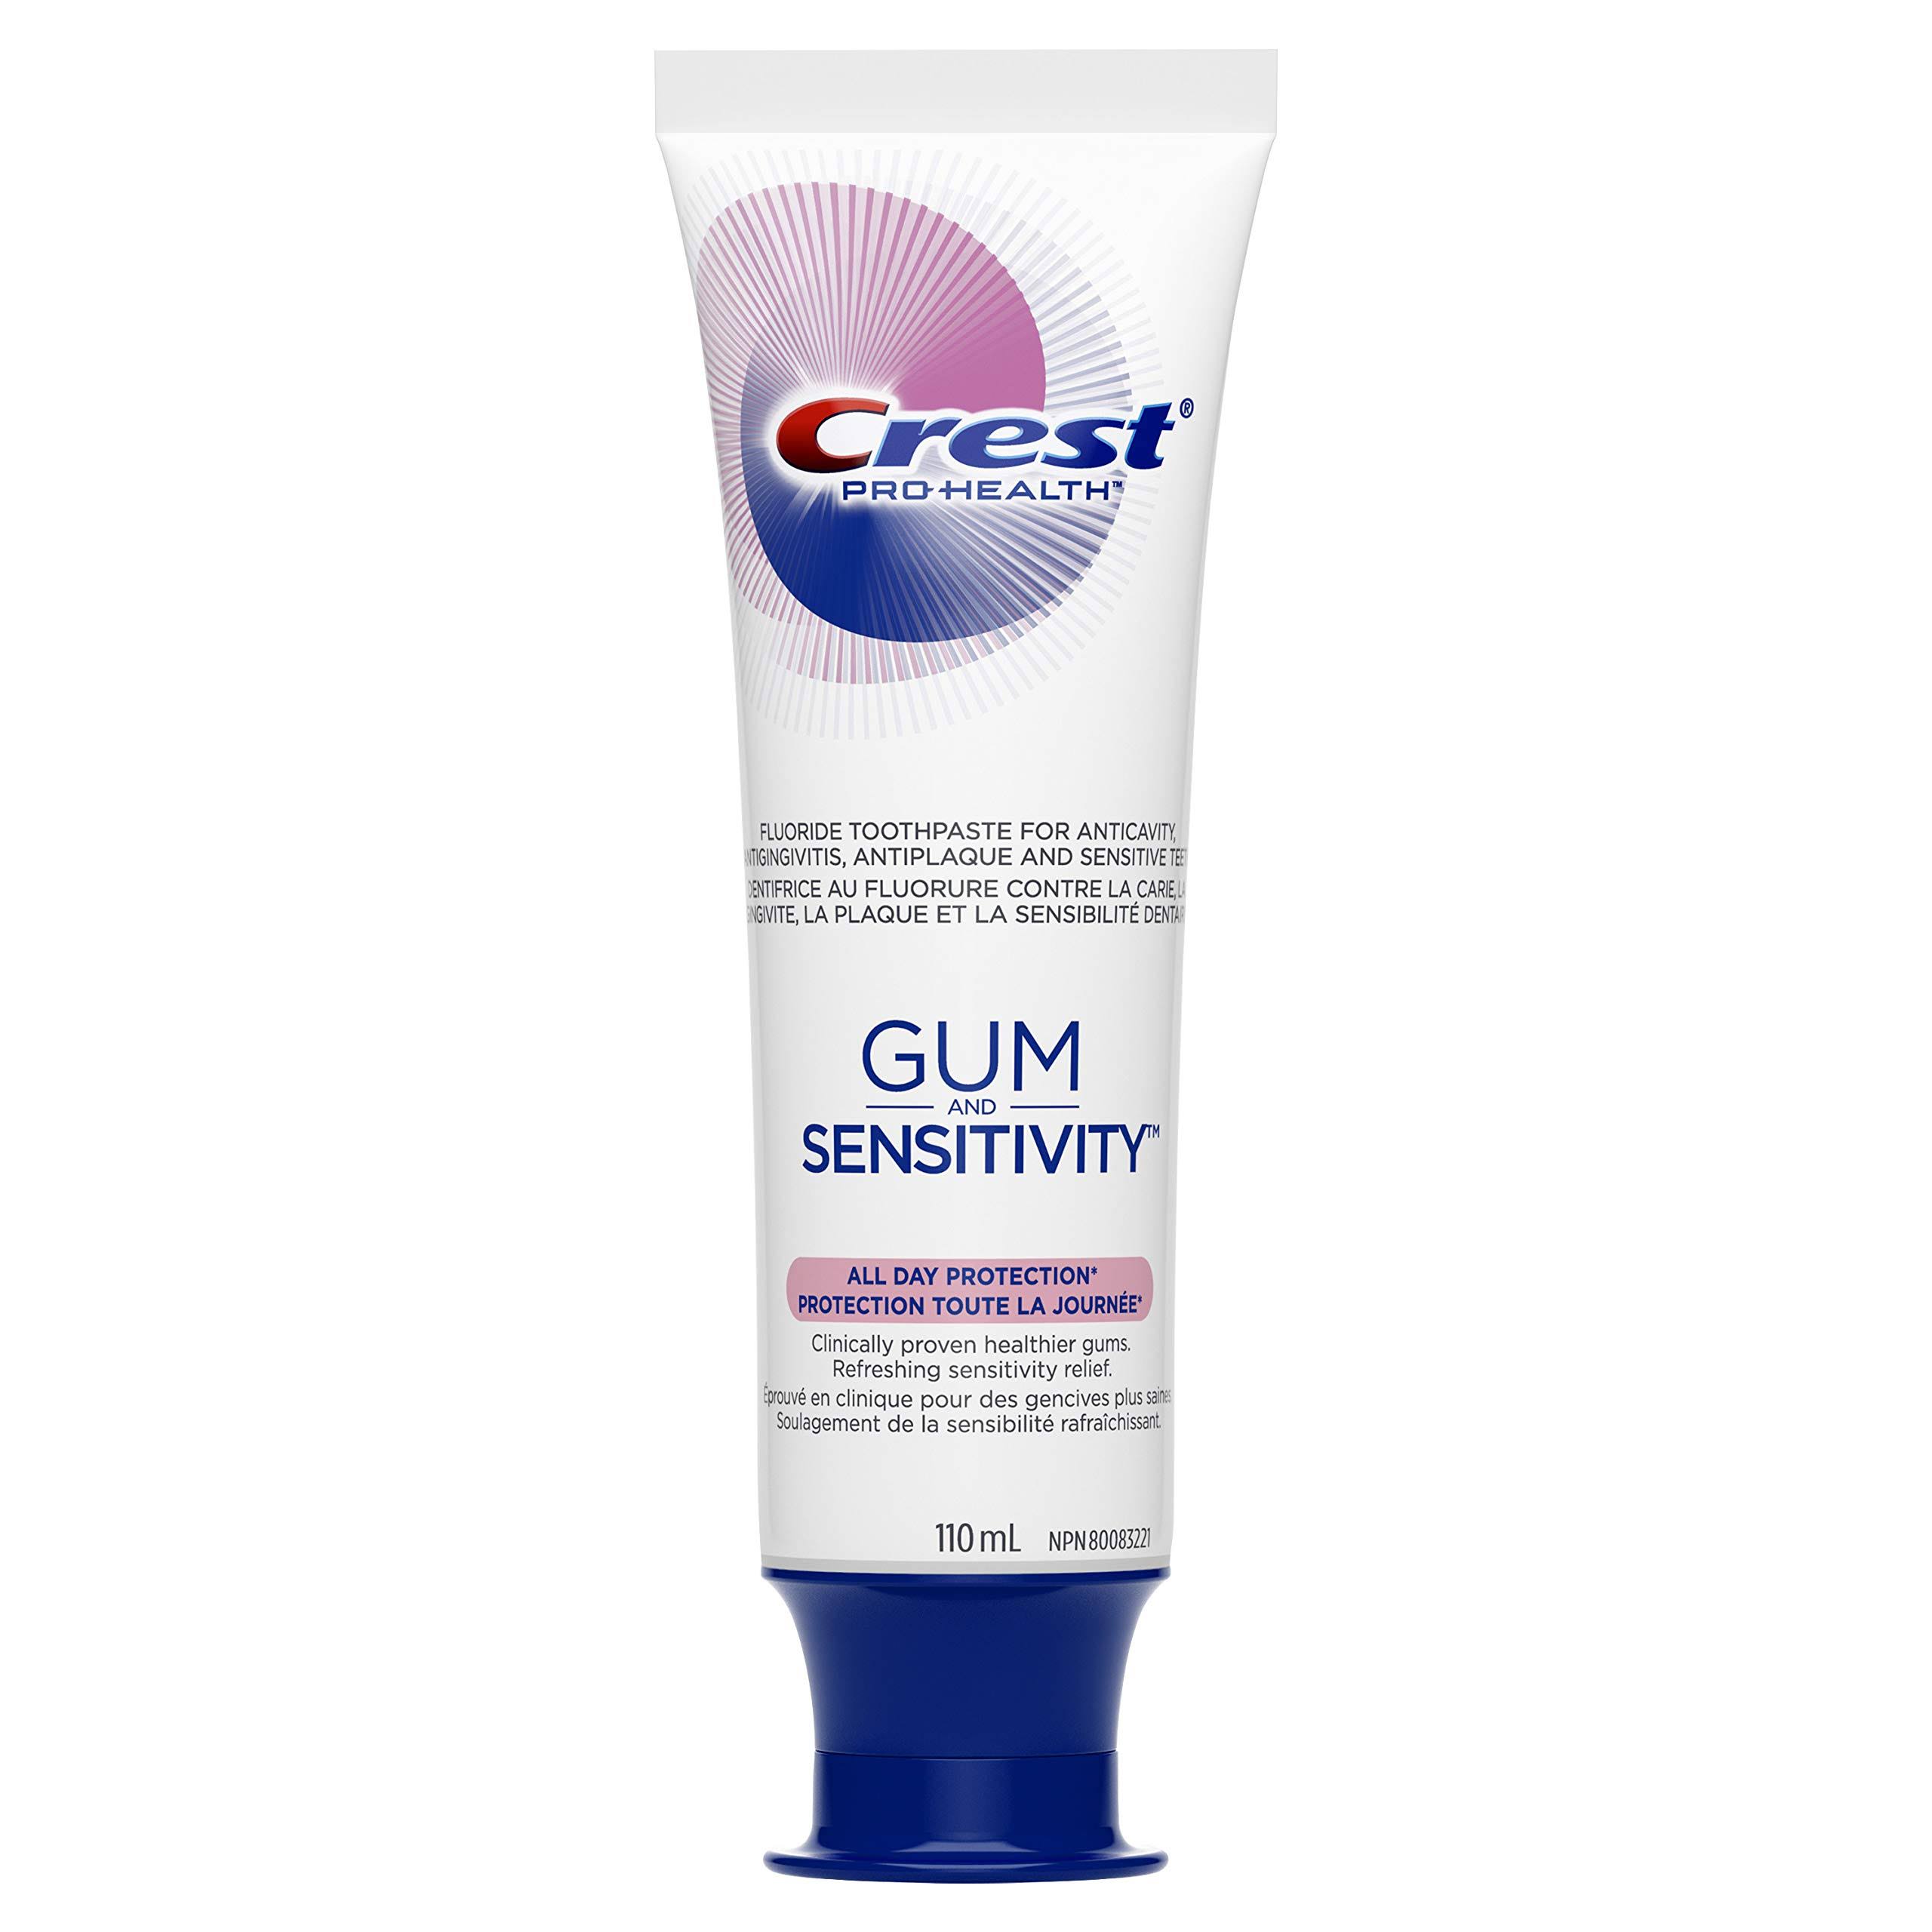 Crest Pro Health Gum & Sensitivity All Day Protection Toothpaste 110mL